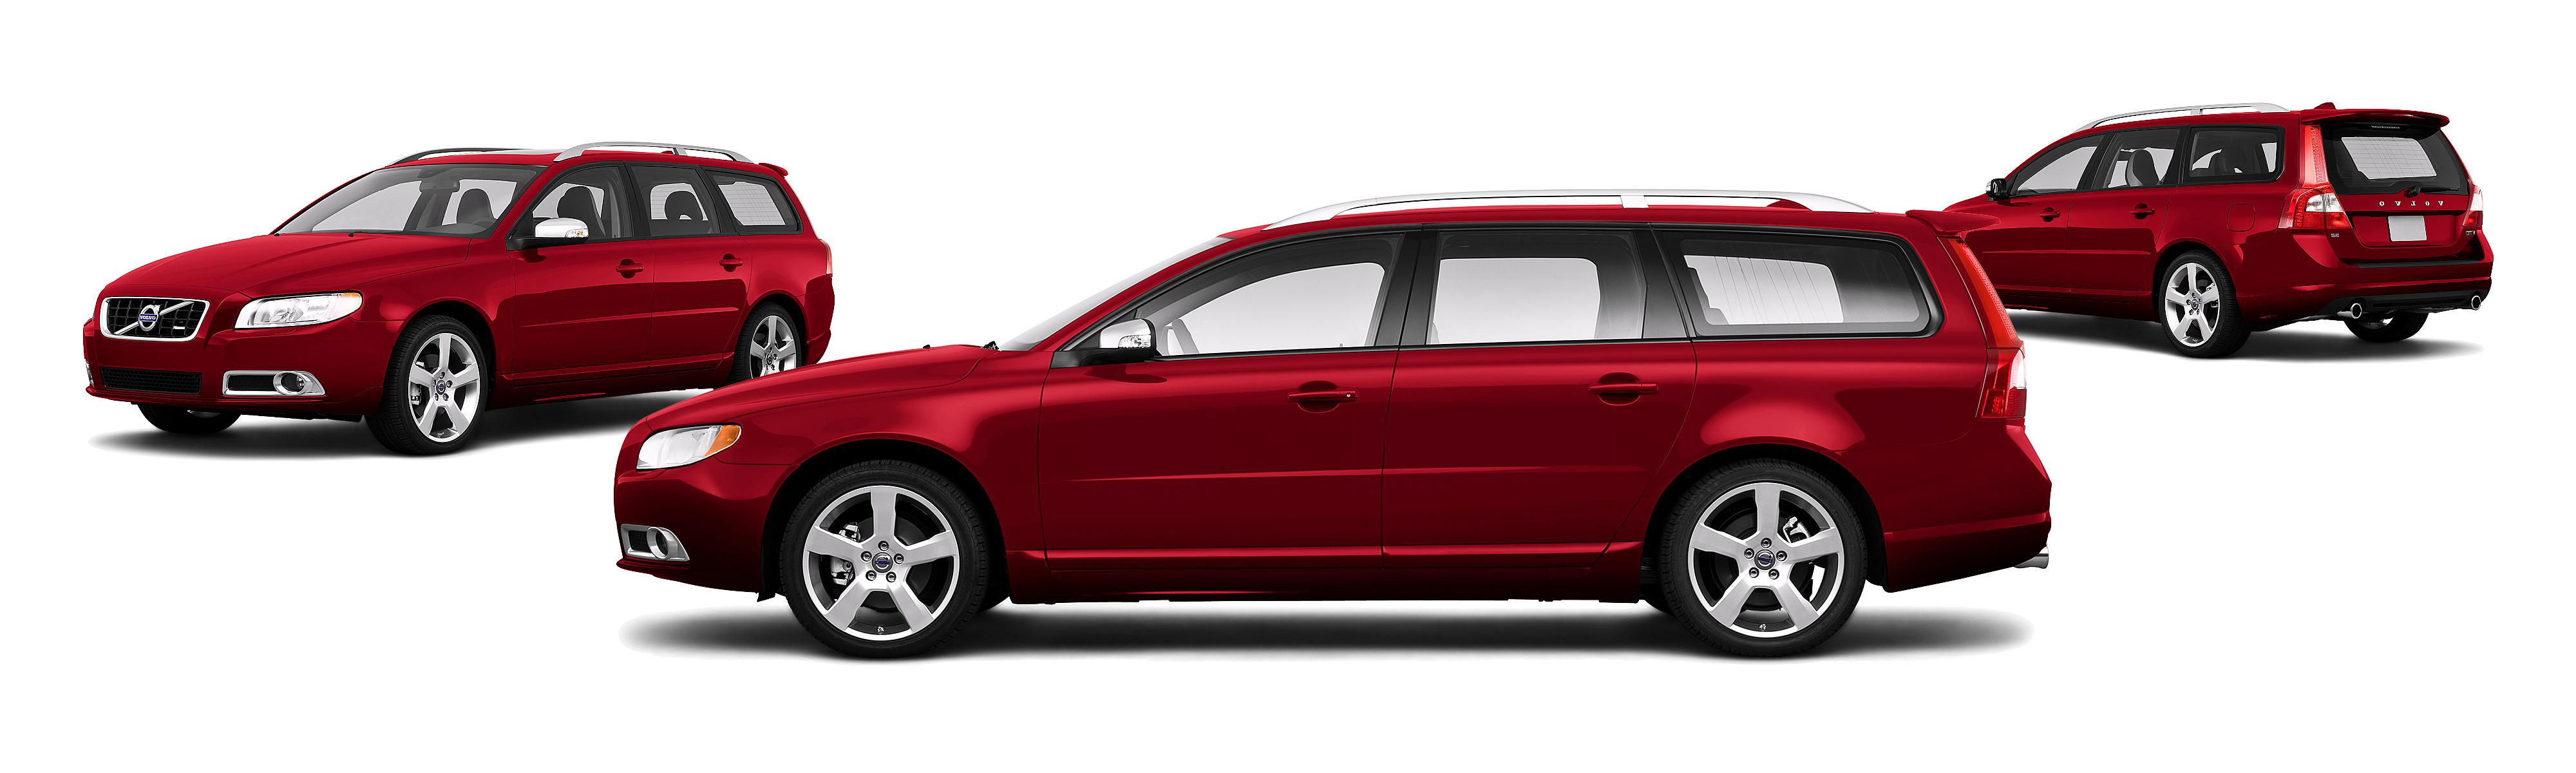 2010 Volvo V70 3.2 R-Design 4dr Wagon - Research - GrooveCar